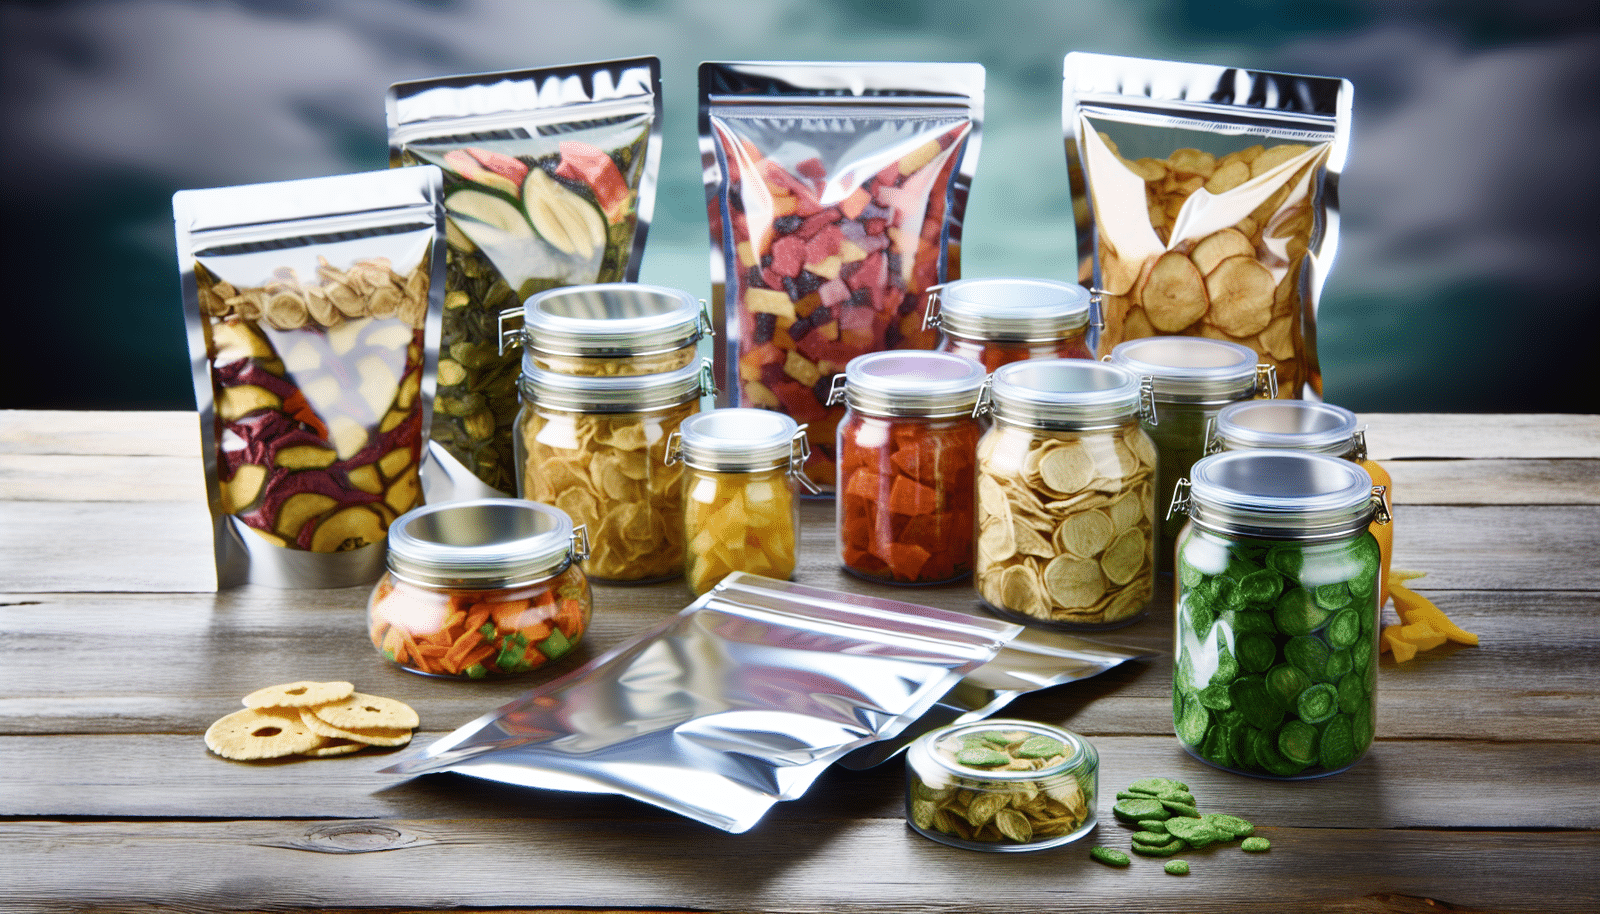 Storing dehydrated foods in Mylar bags or glass jars